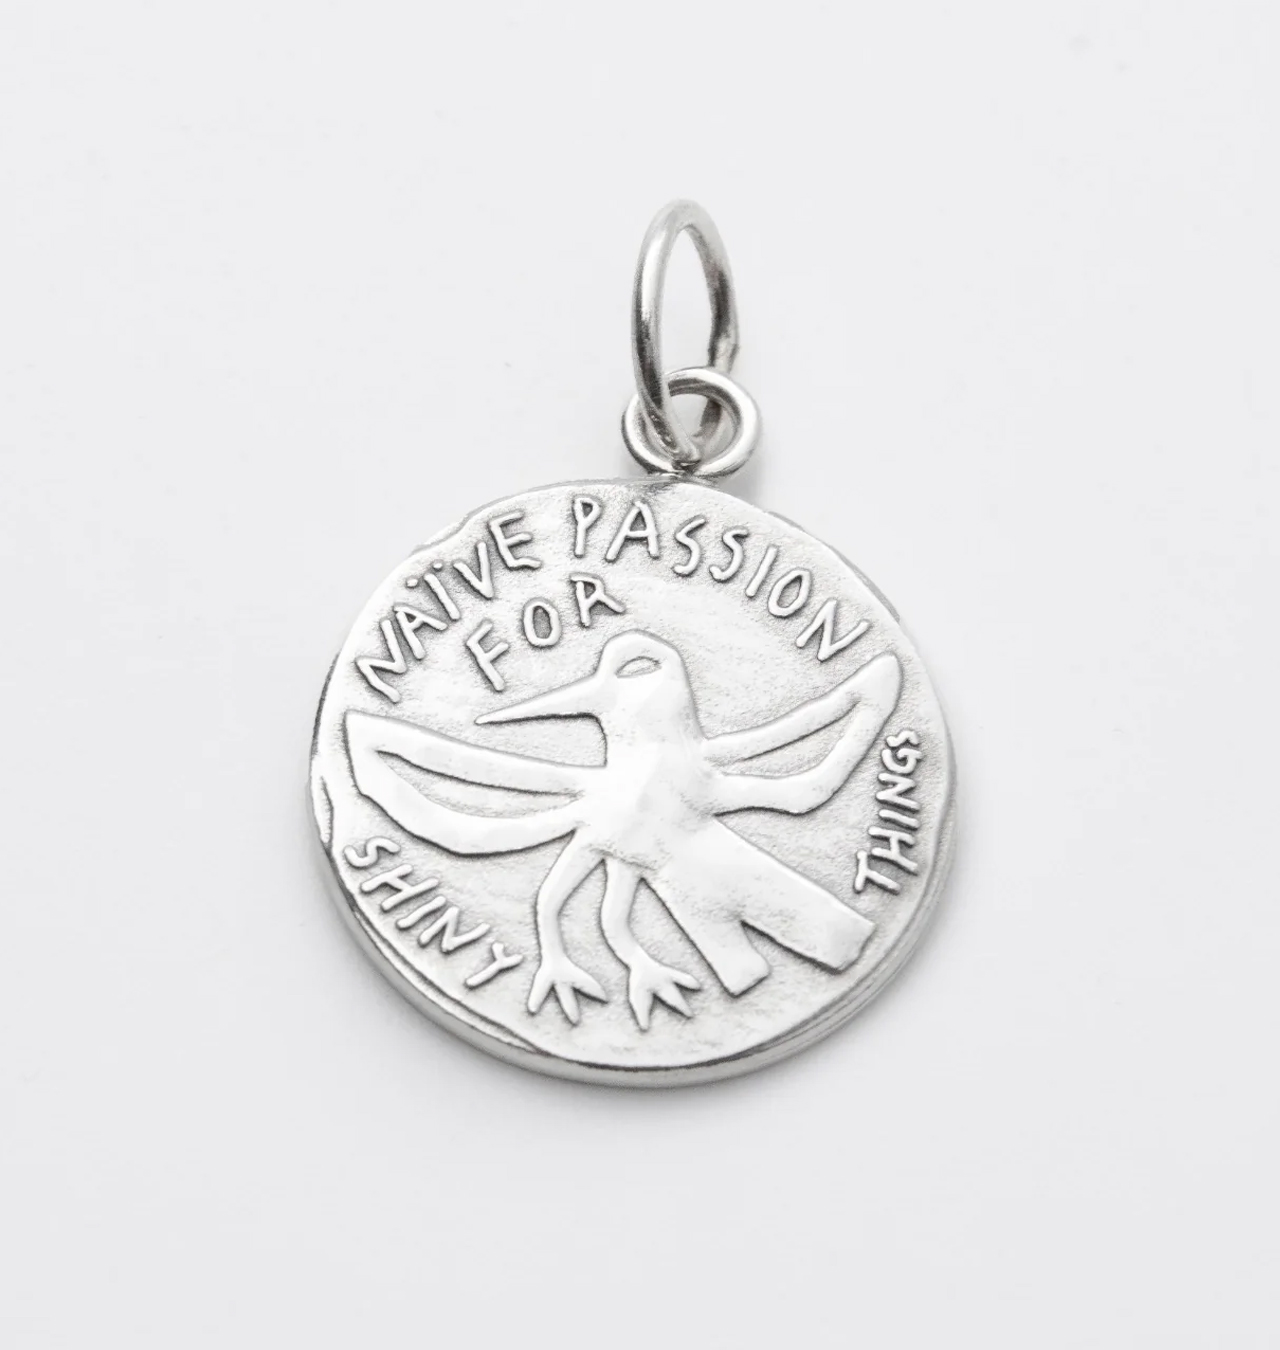 O.P Jewellery - Magpie ´Naive Passion For Shiny Things´ Pendent